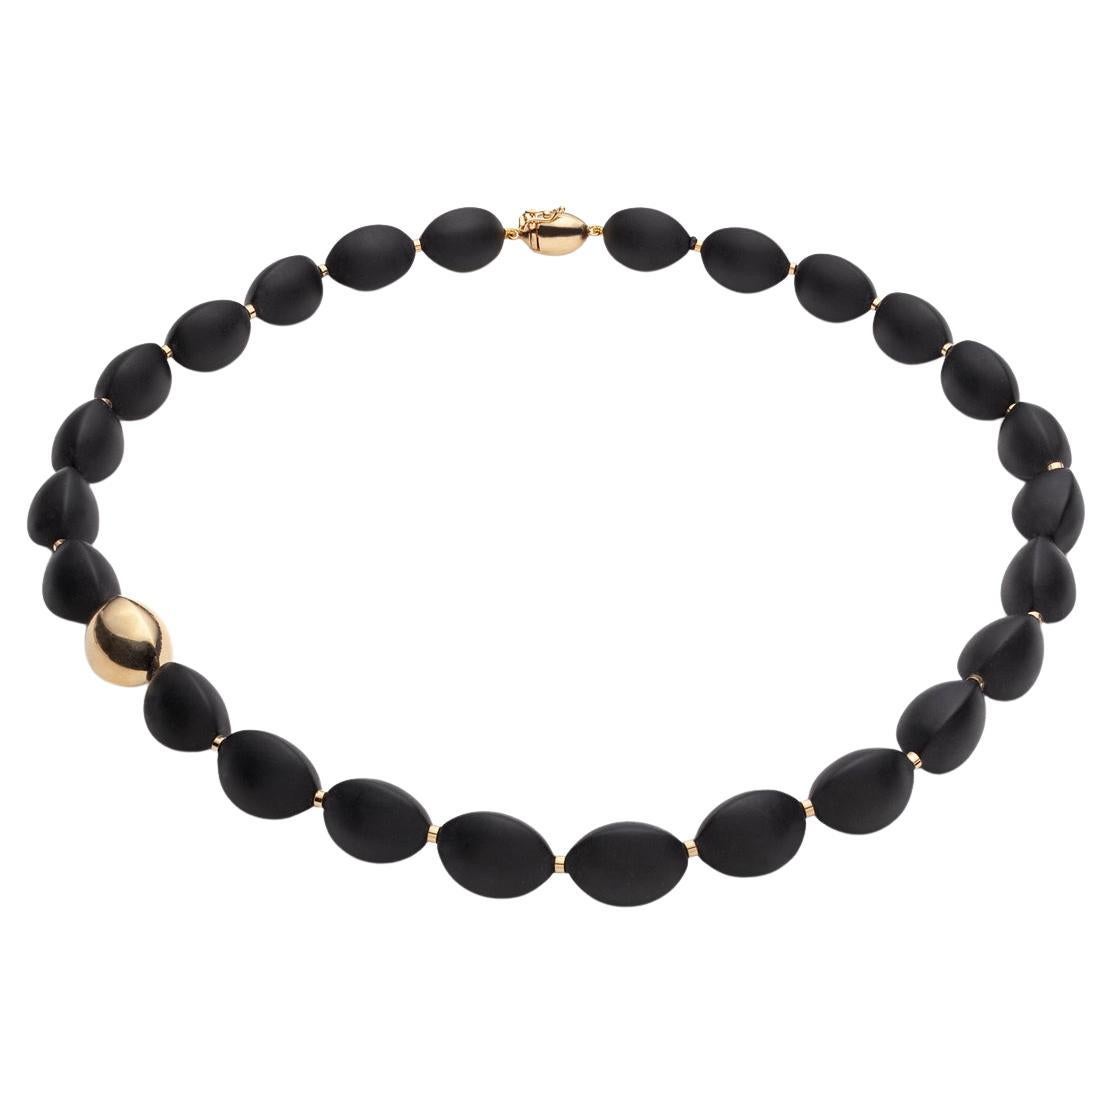 Vulcanica, Volcanic Rock Necklace Mounted with 18k Yellow Gold